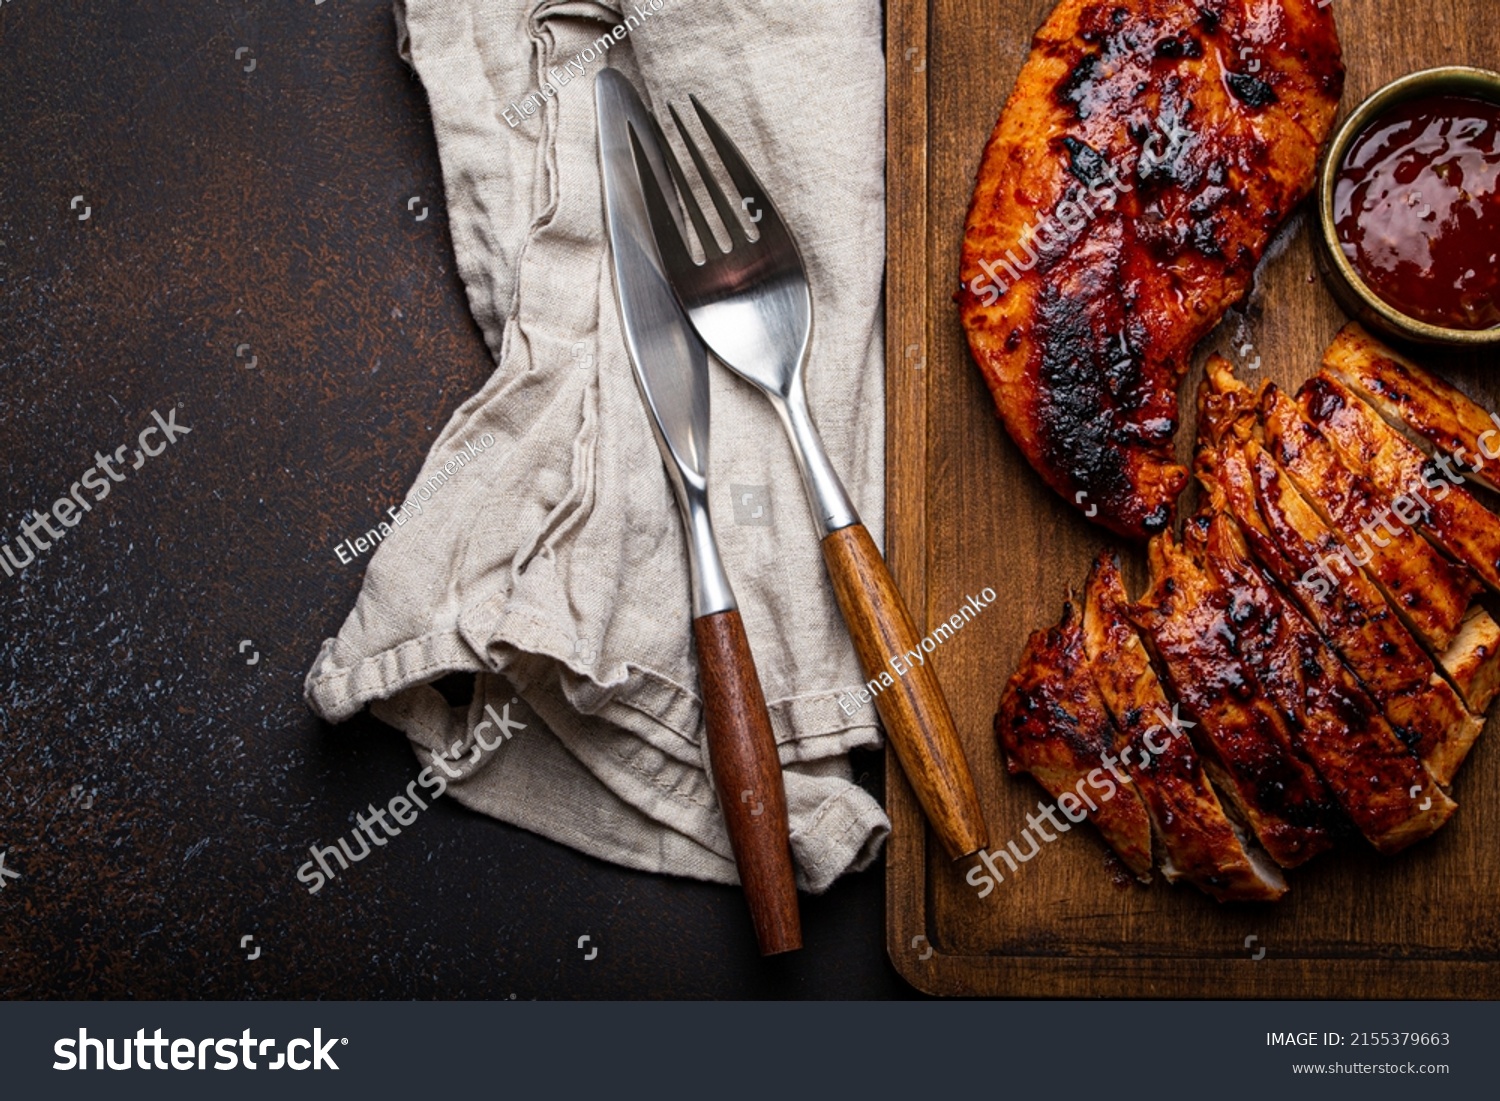 Grilled turkey or chicken marinated fillet with red sauce served and sliced on wooden cutting board on stone brown background from above, poultry breast barbecue space for text #2155379663